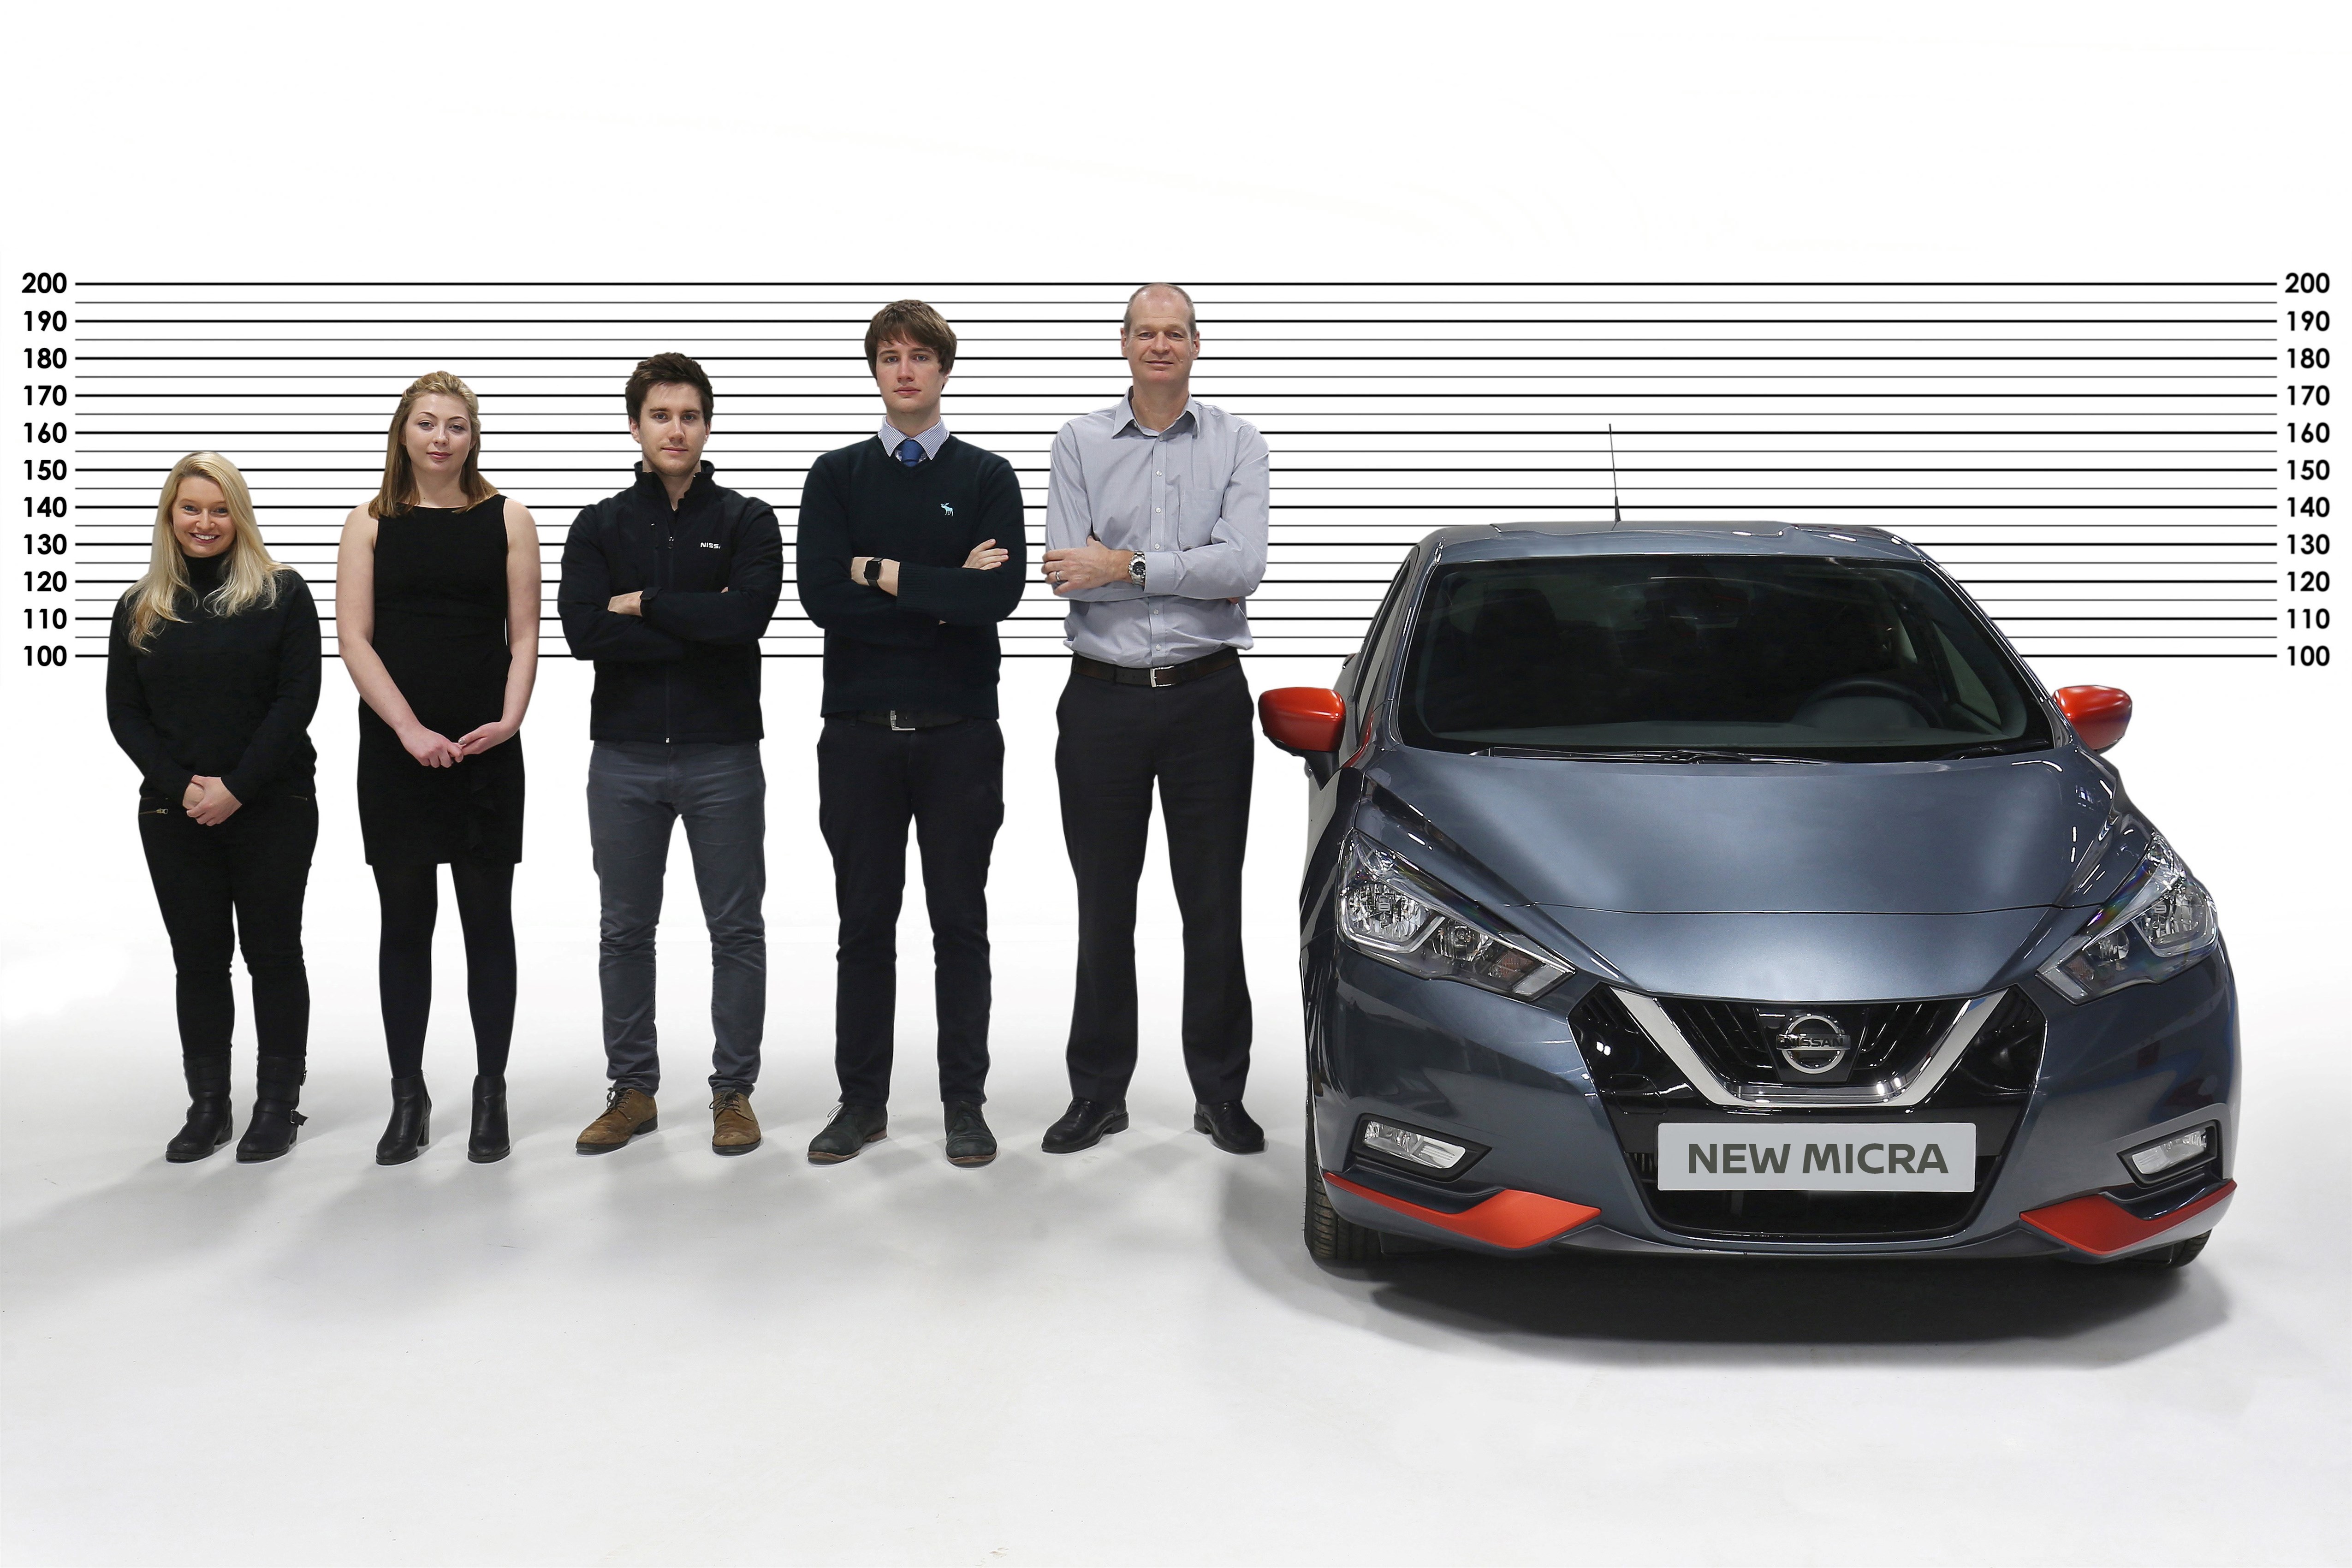 Nissan Micra: the ‘made to measure’ supermini